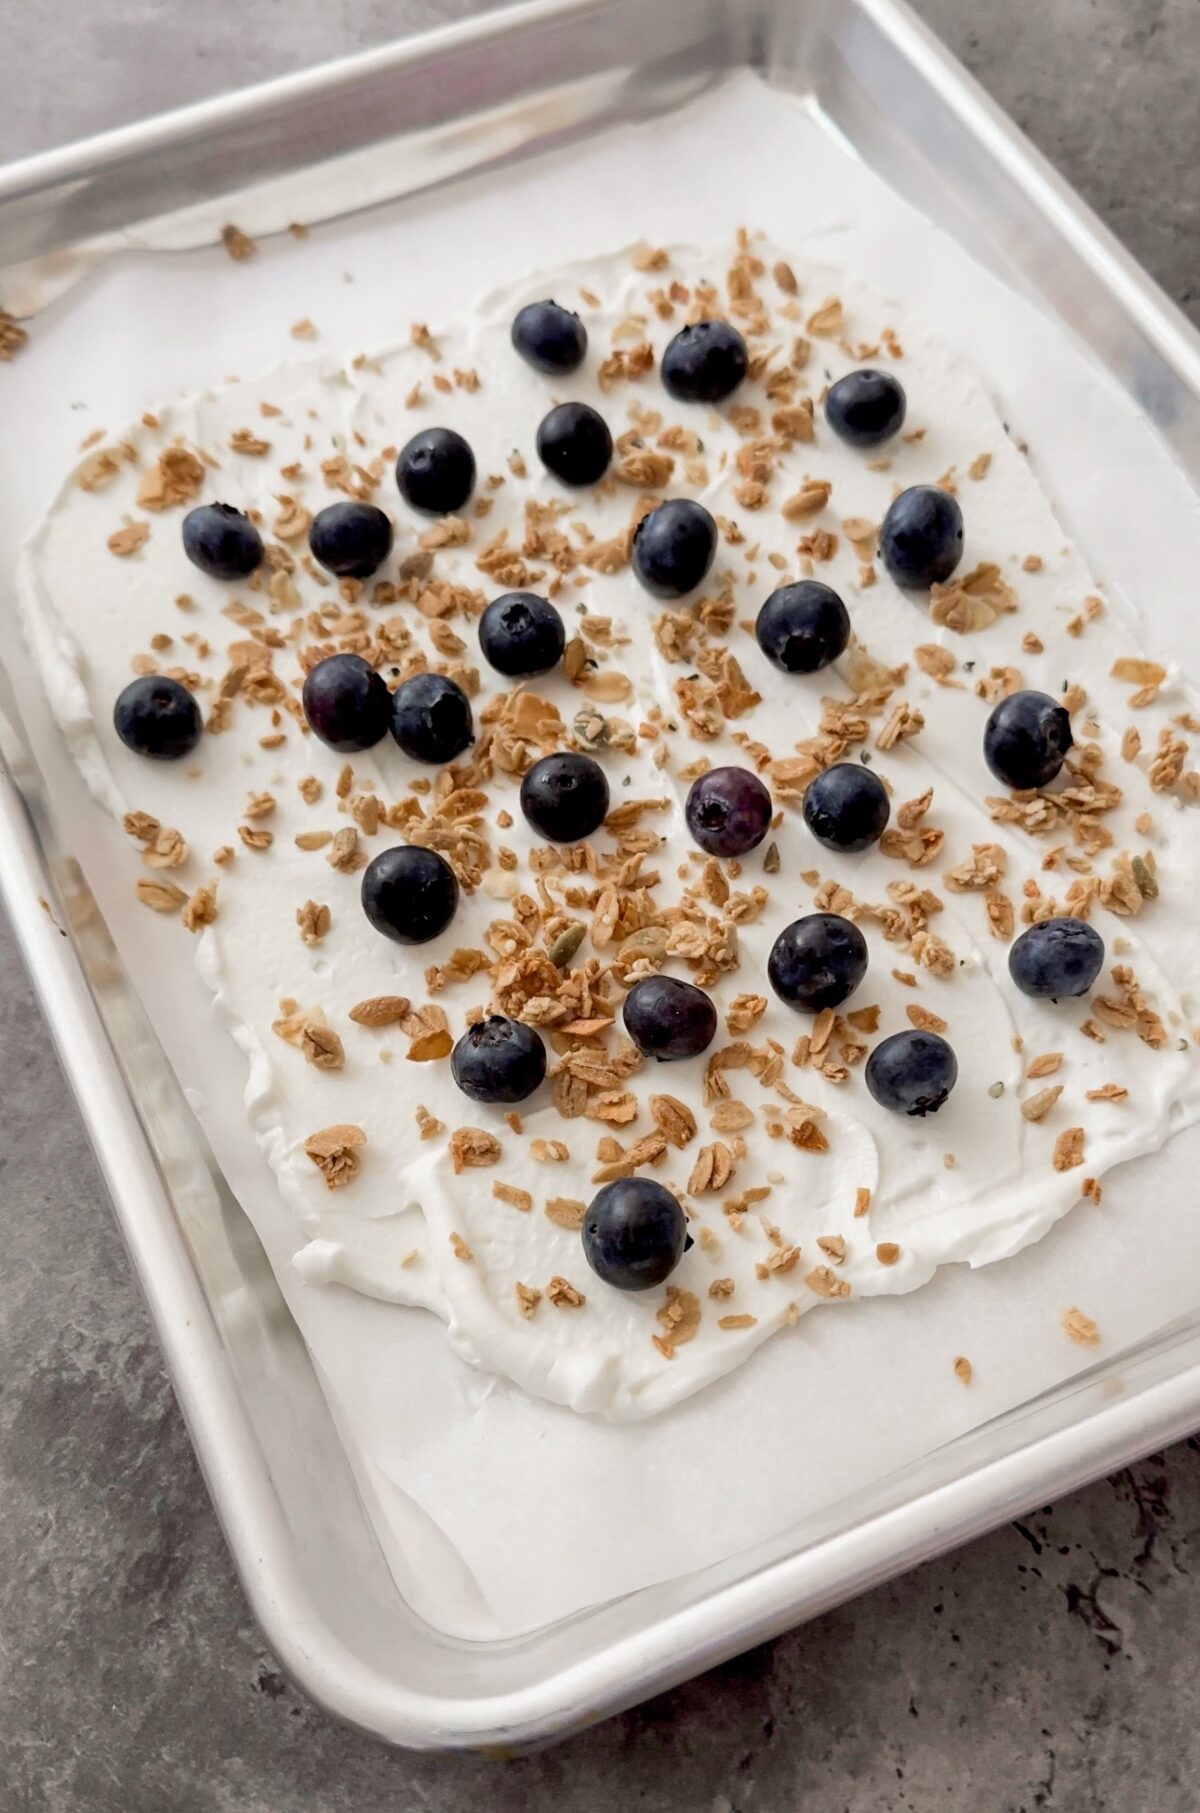 blueberries and granolas sprinkled on a layer of yogurt spread on cookie sheet
